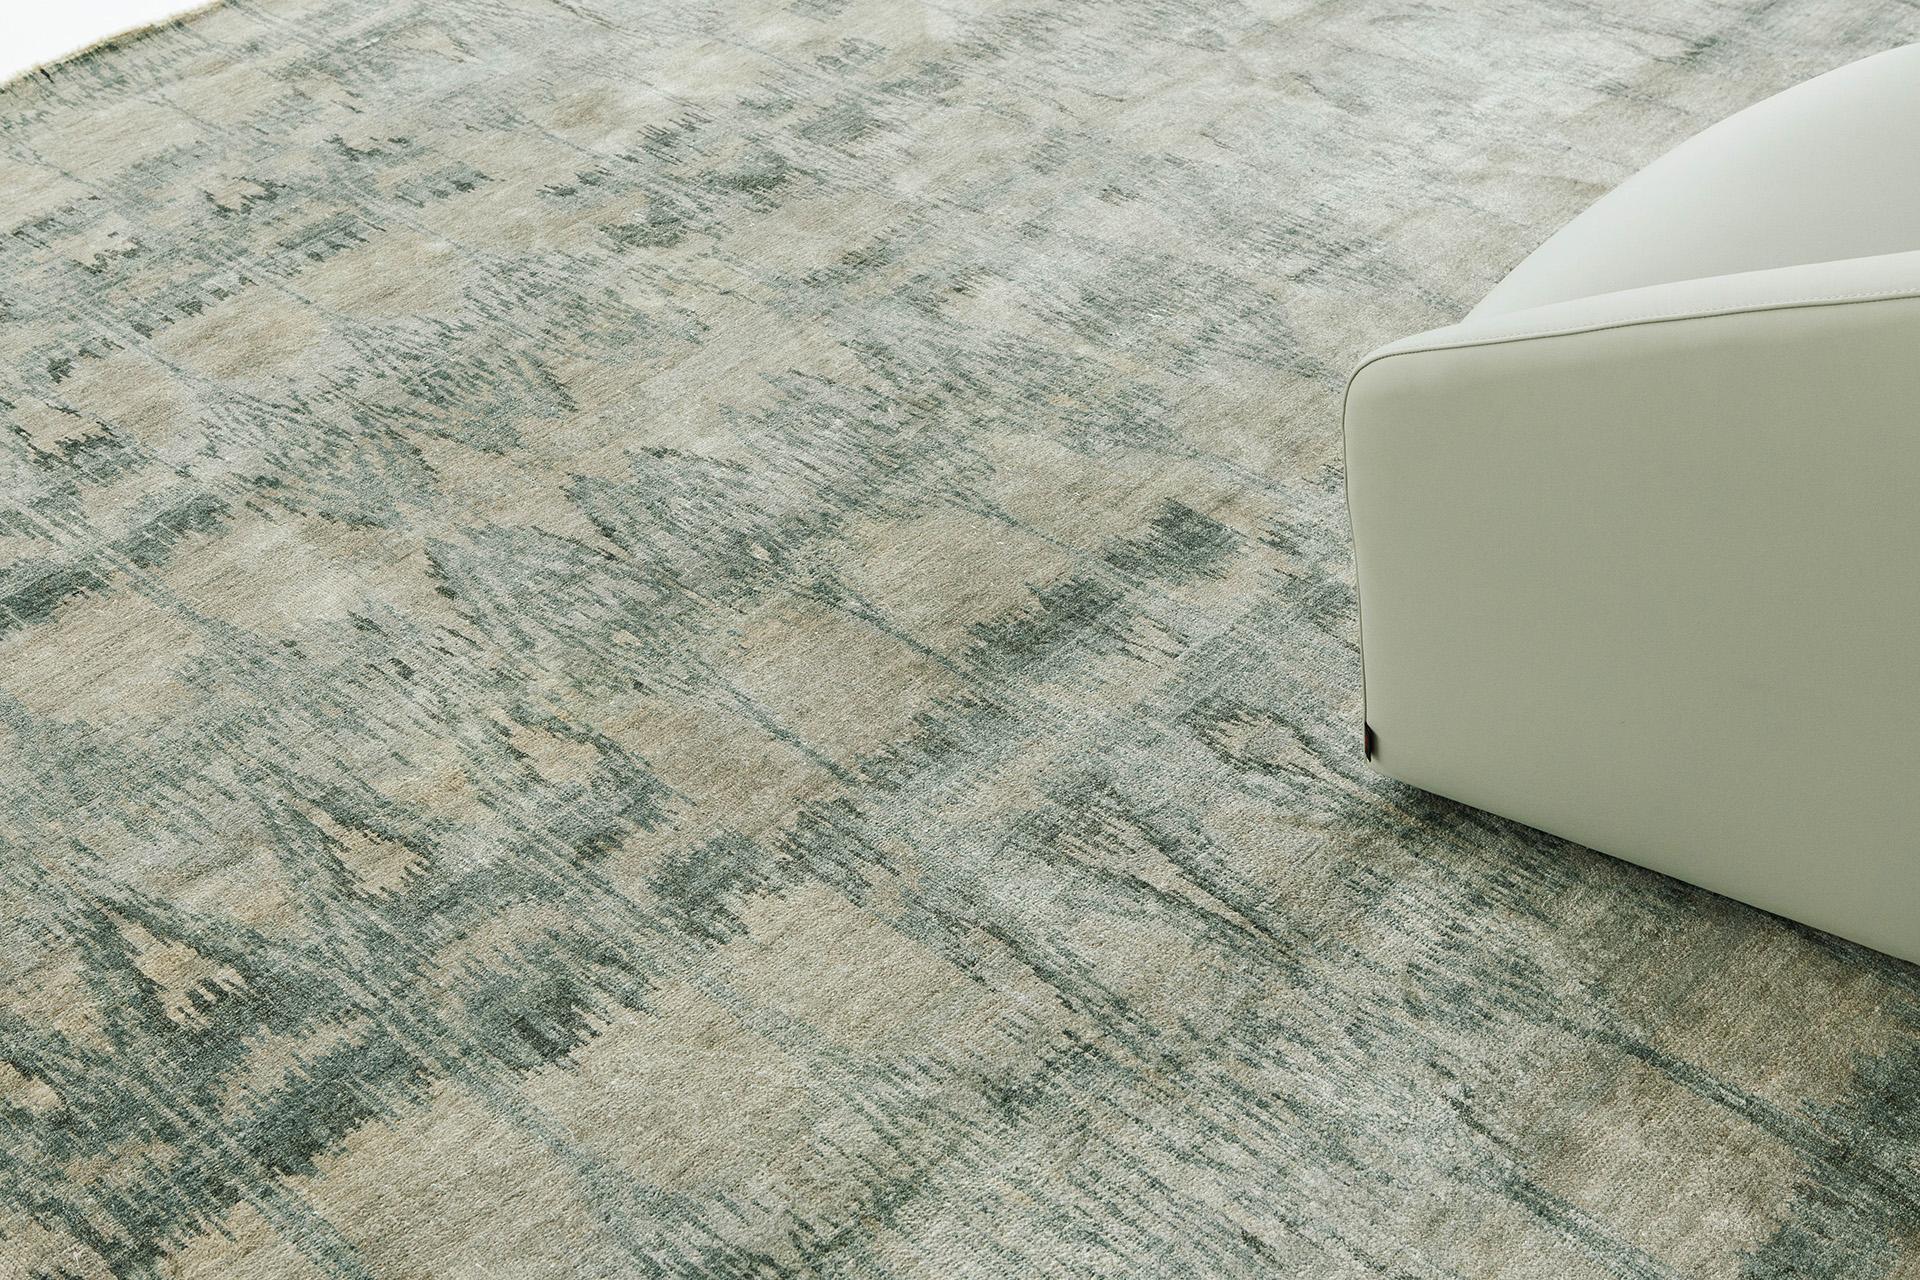 Arava' is a beautiful sage green Ikat design rug. This rug's attention to detail is quite exquisite and its silk pile weave is nothing short of luxury. Ikat designs have been globally inspired for today's modern design world.